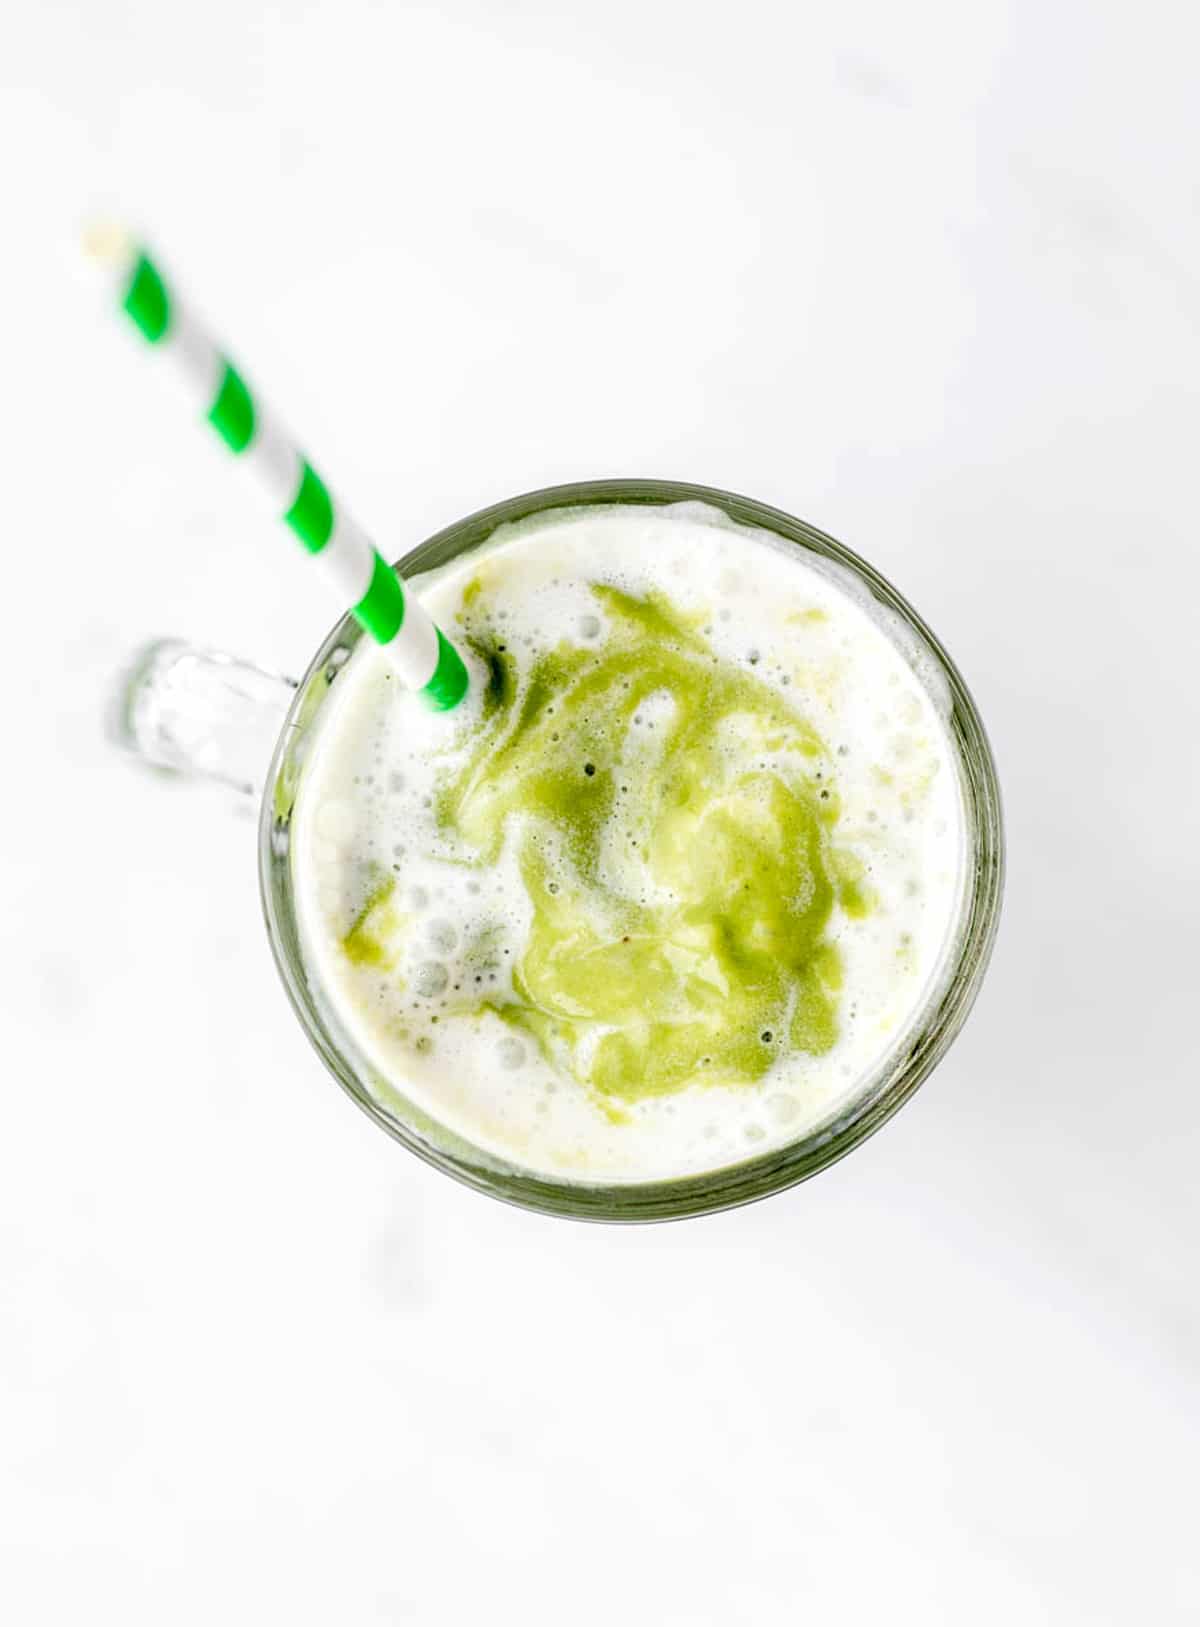 An overhead shot of the healthy shamrock shake in a glass with a straw.